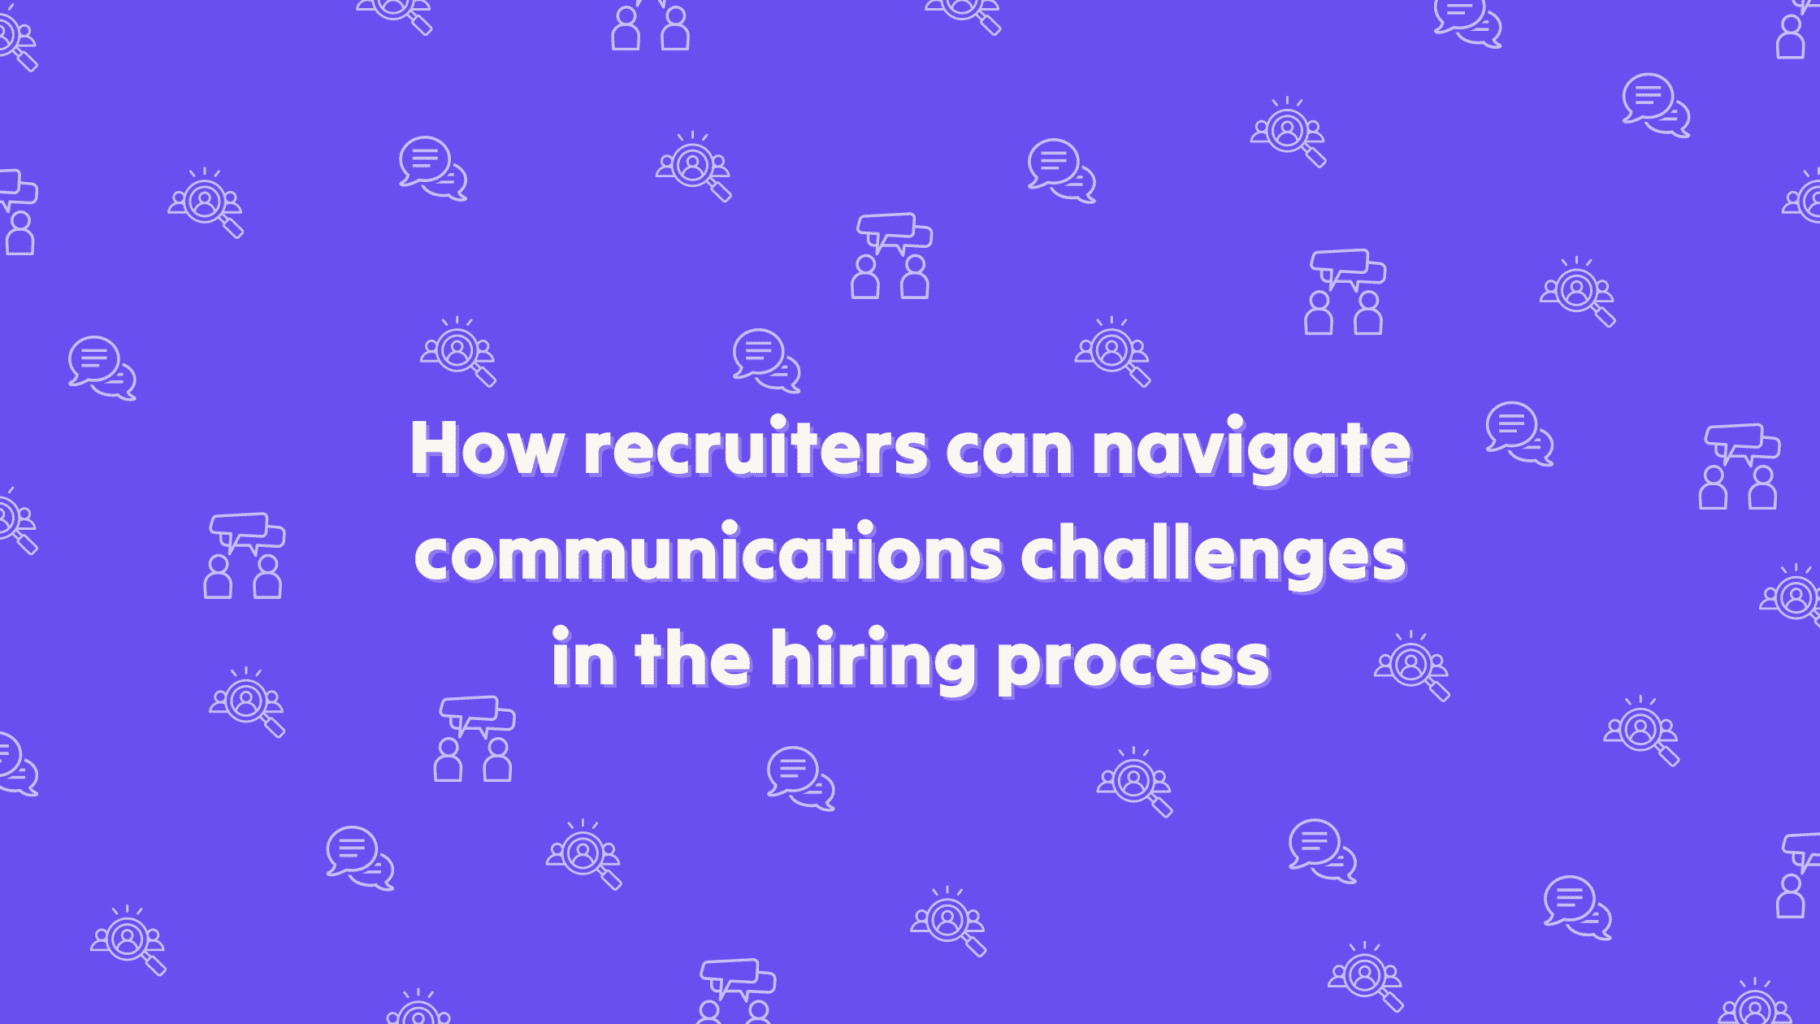 How To Navigate Communications Challenges As A Recruiter